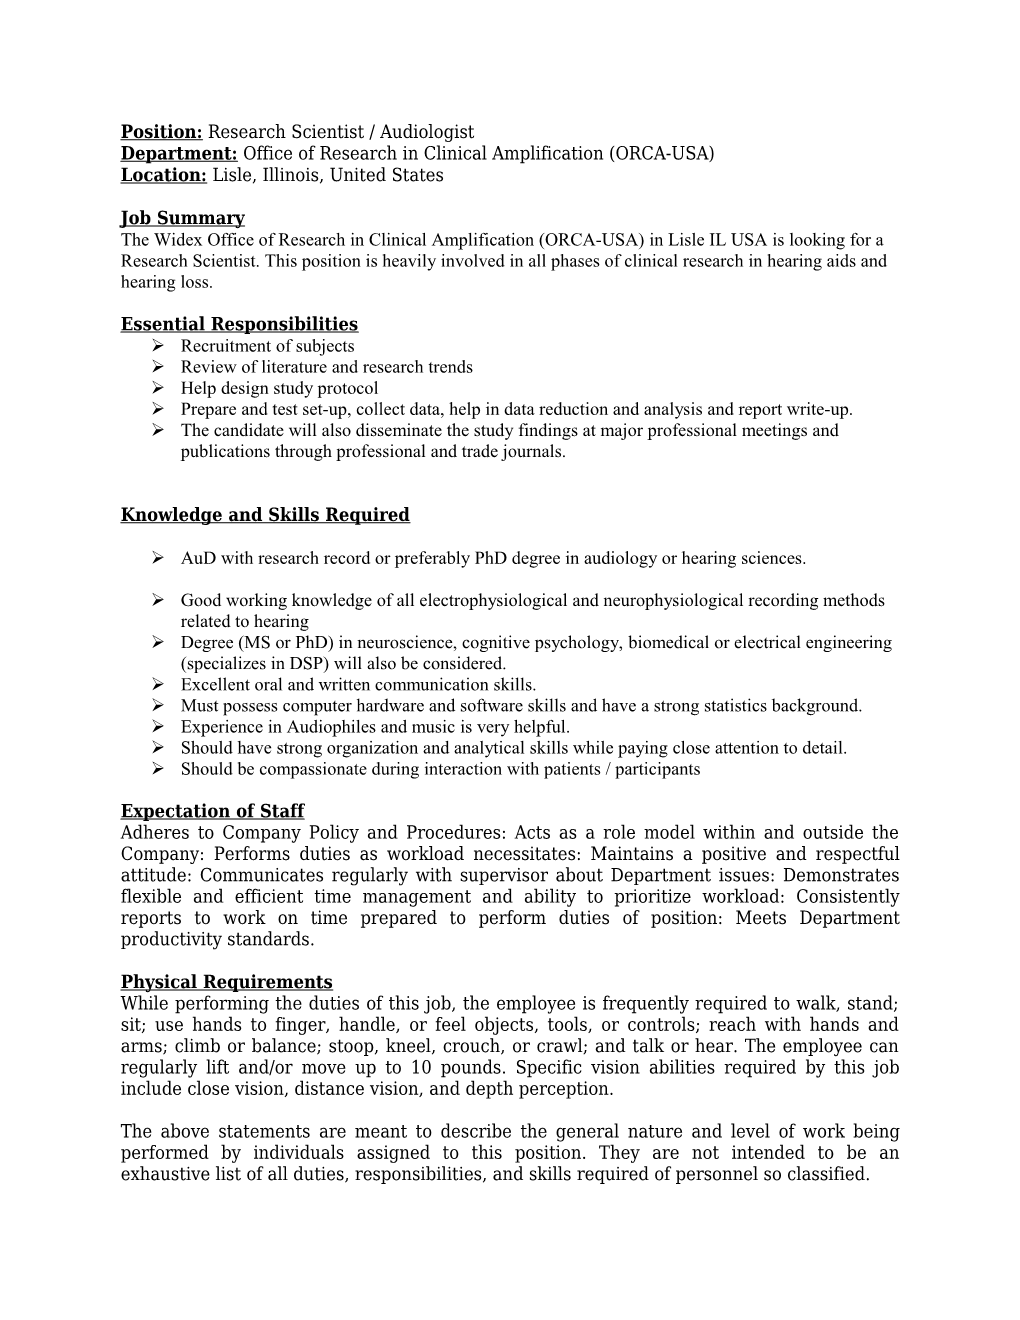 Position: Research Scientist / Audiologist